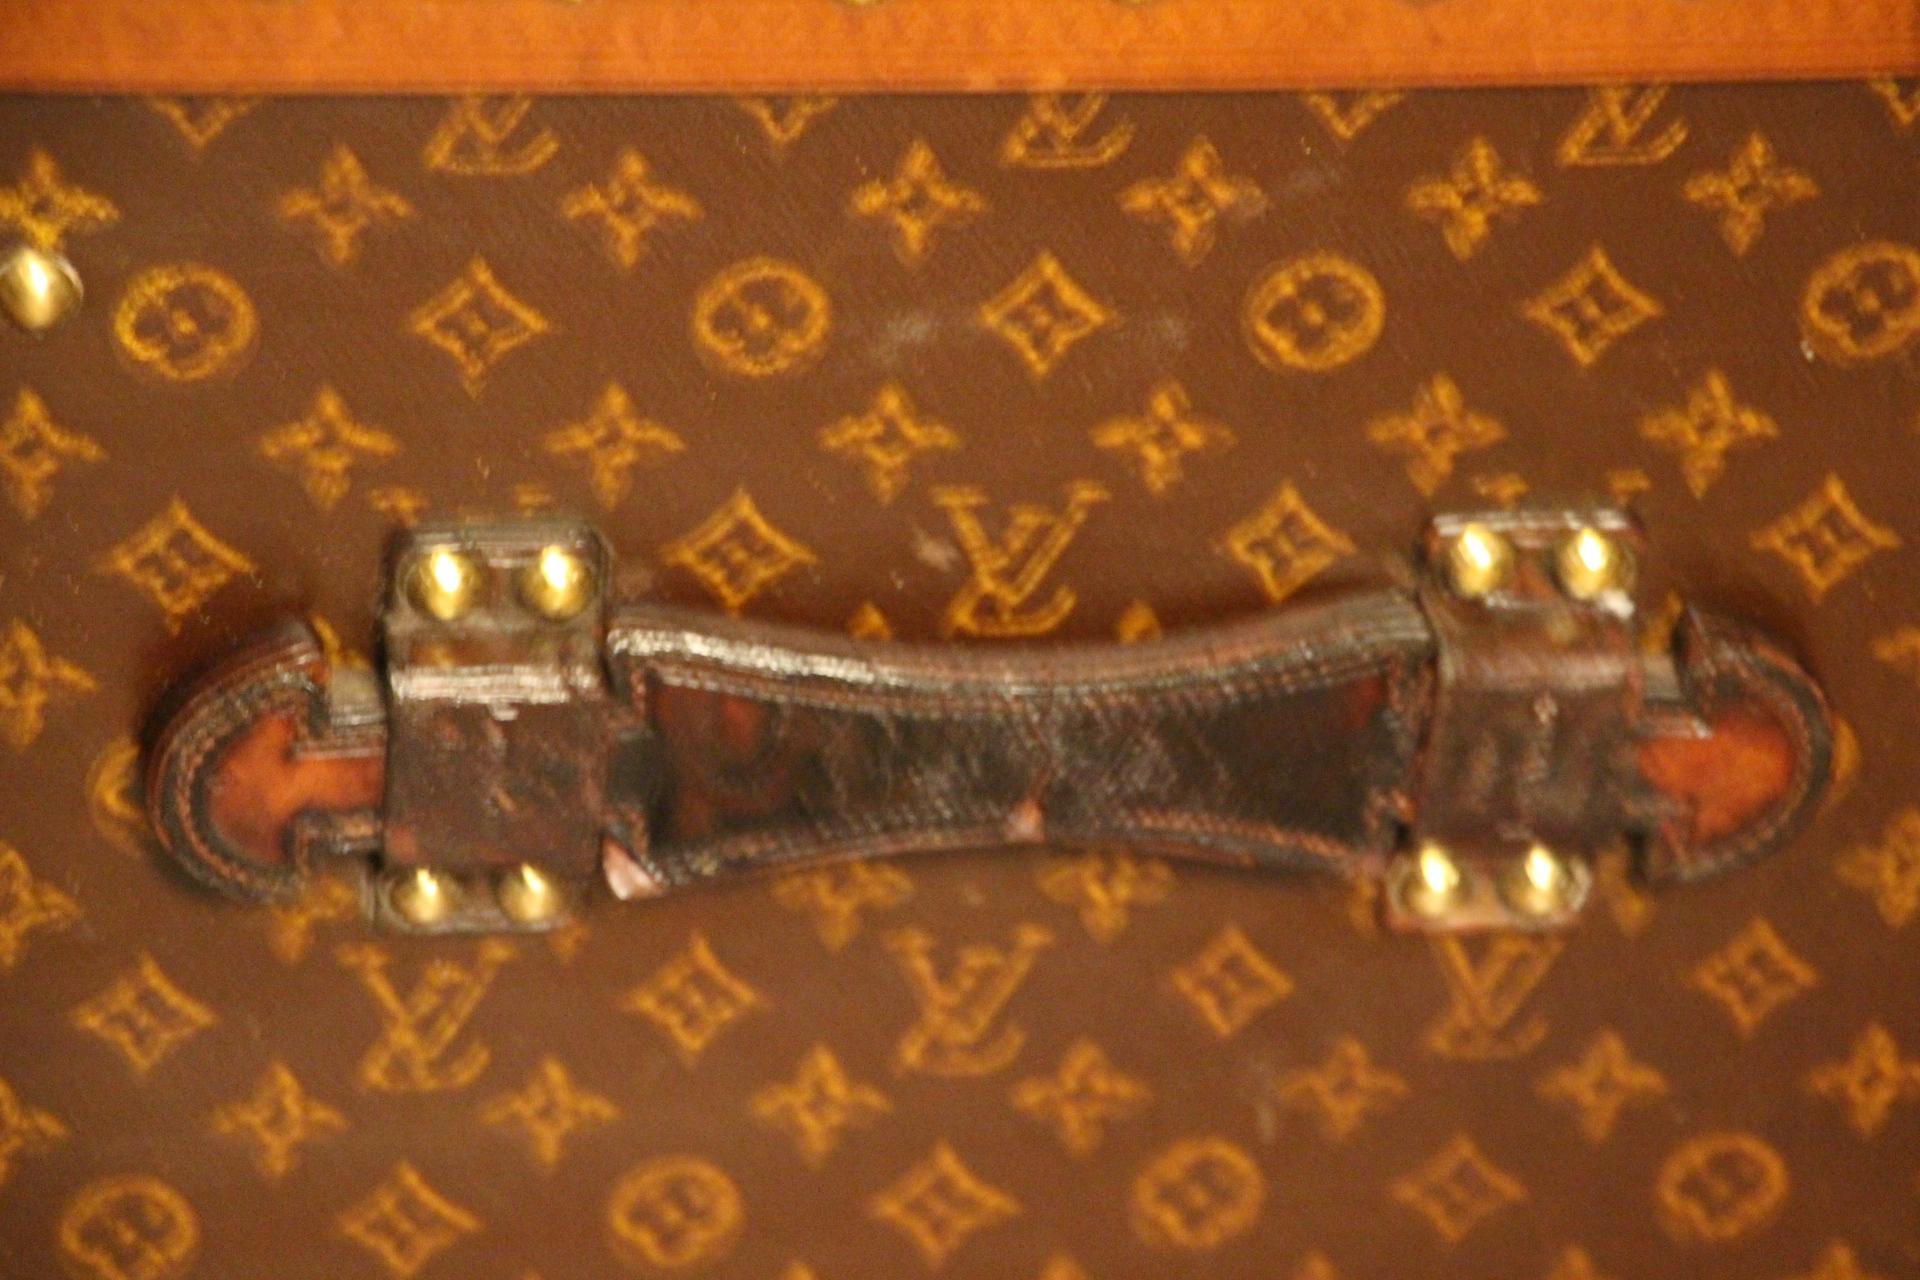 lv trunk for sale